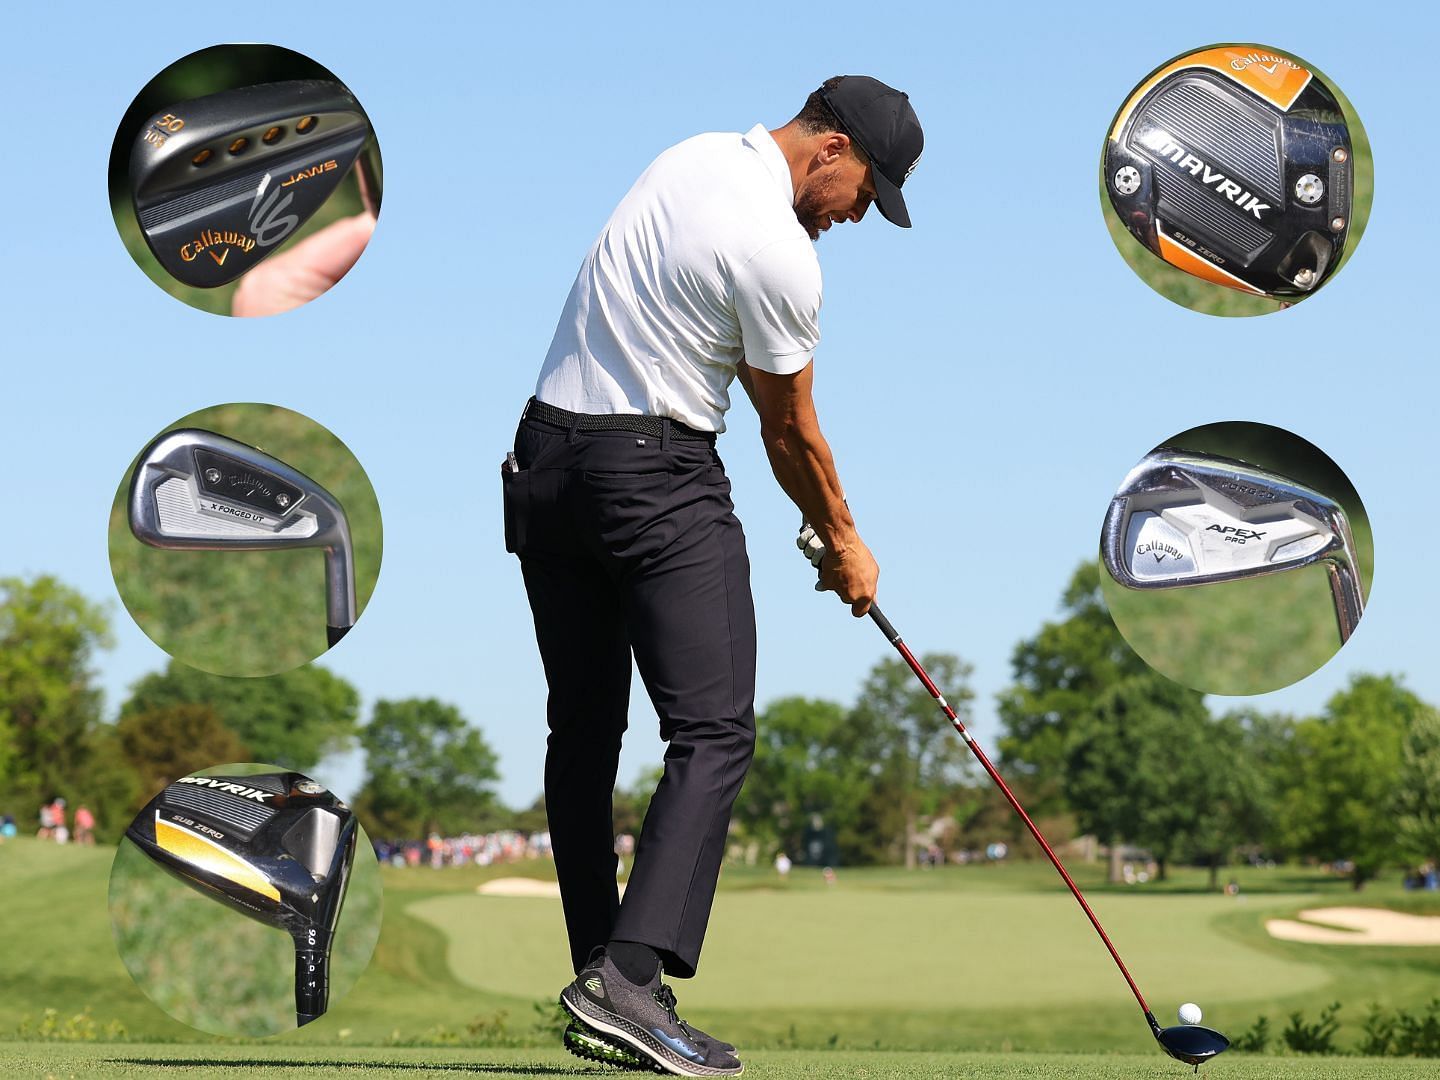 Steph Curry uses Callaway Golf